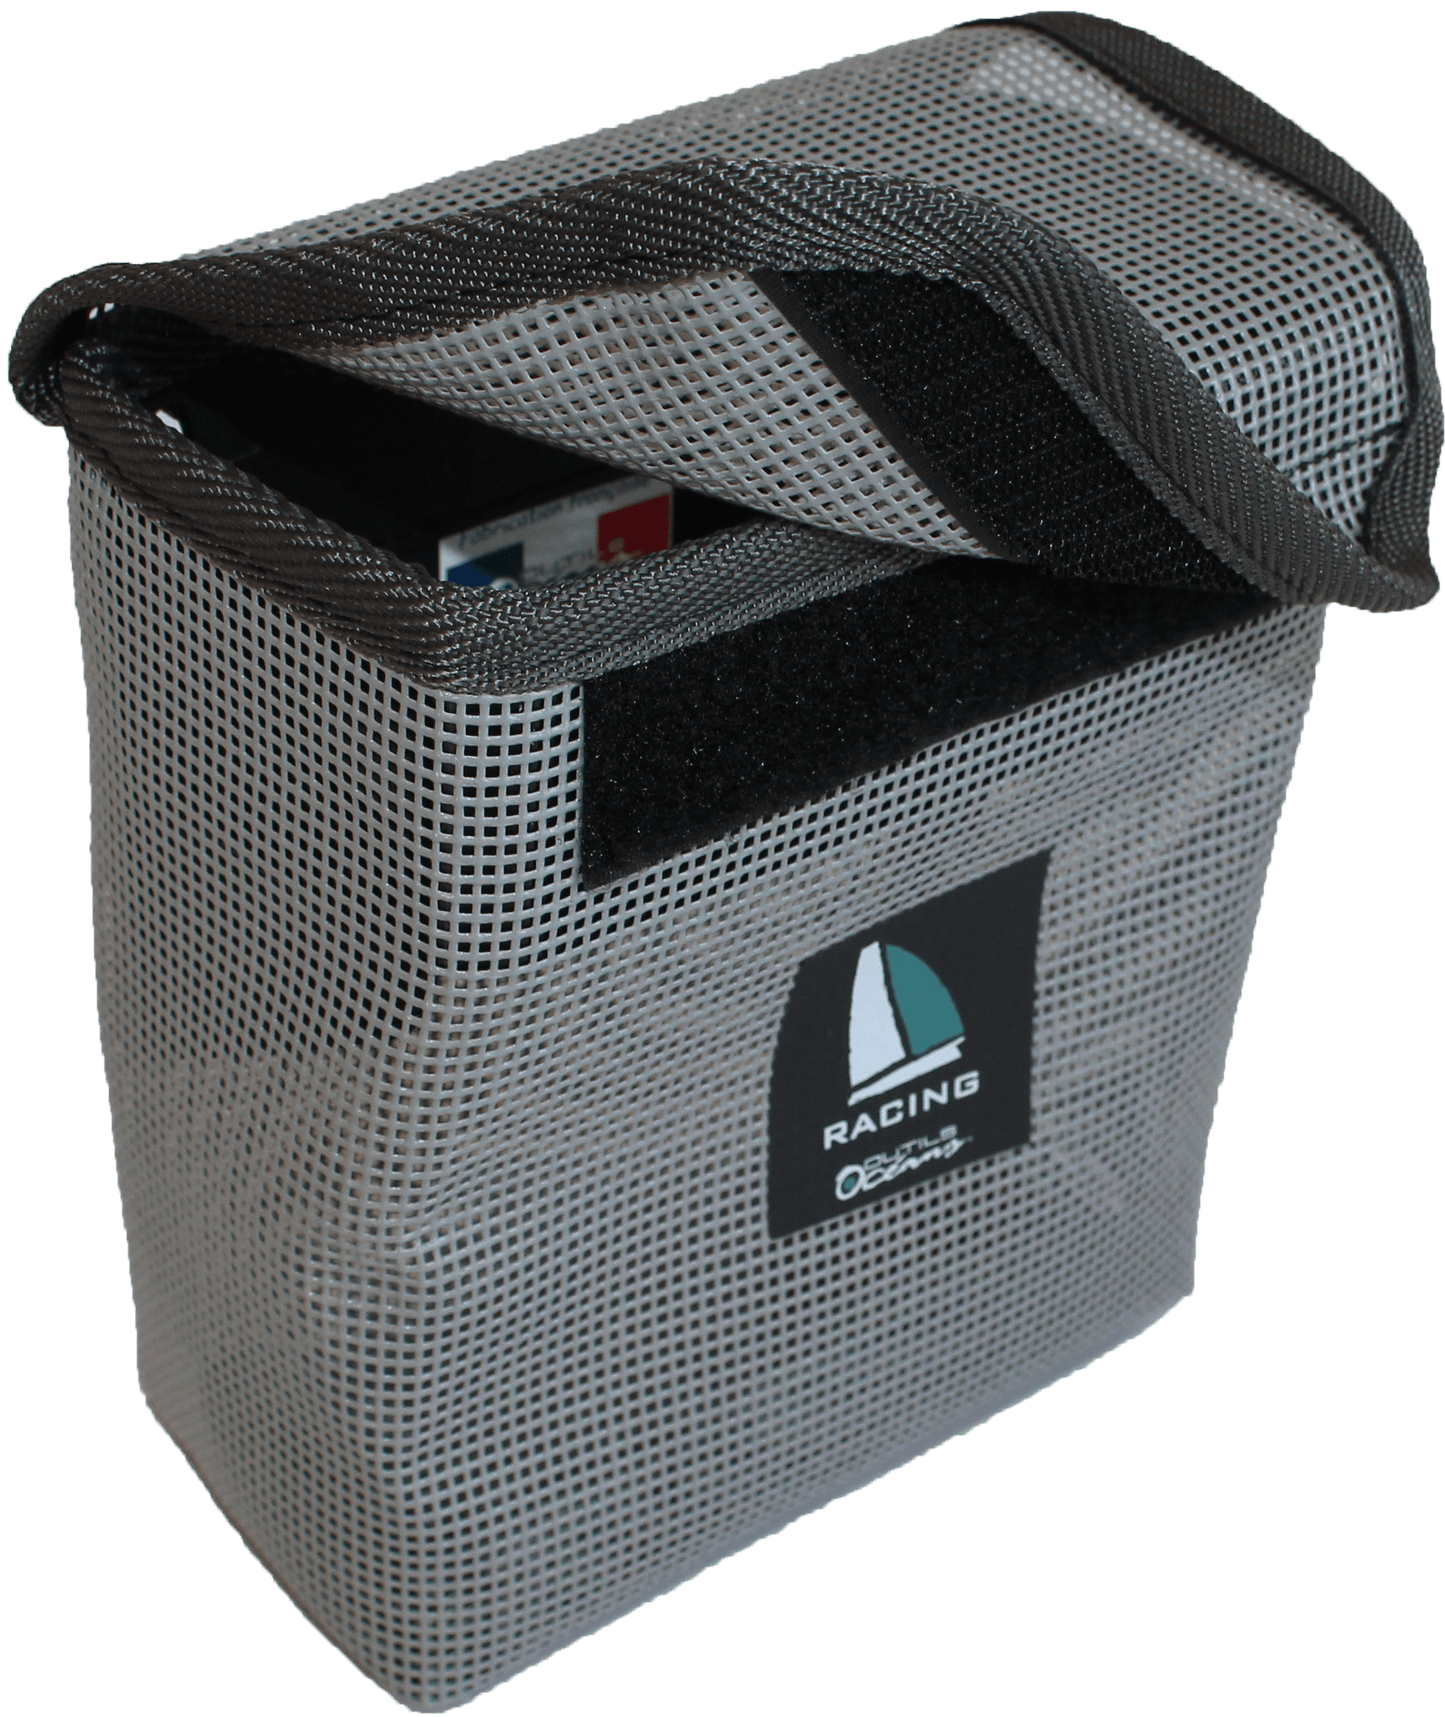 Racing Series - Outils Oceans - Open Rope Bag Sold with and Without Flap